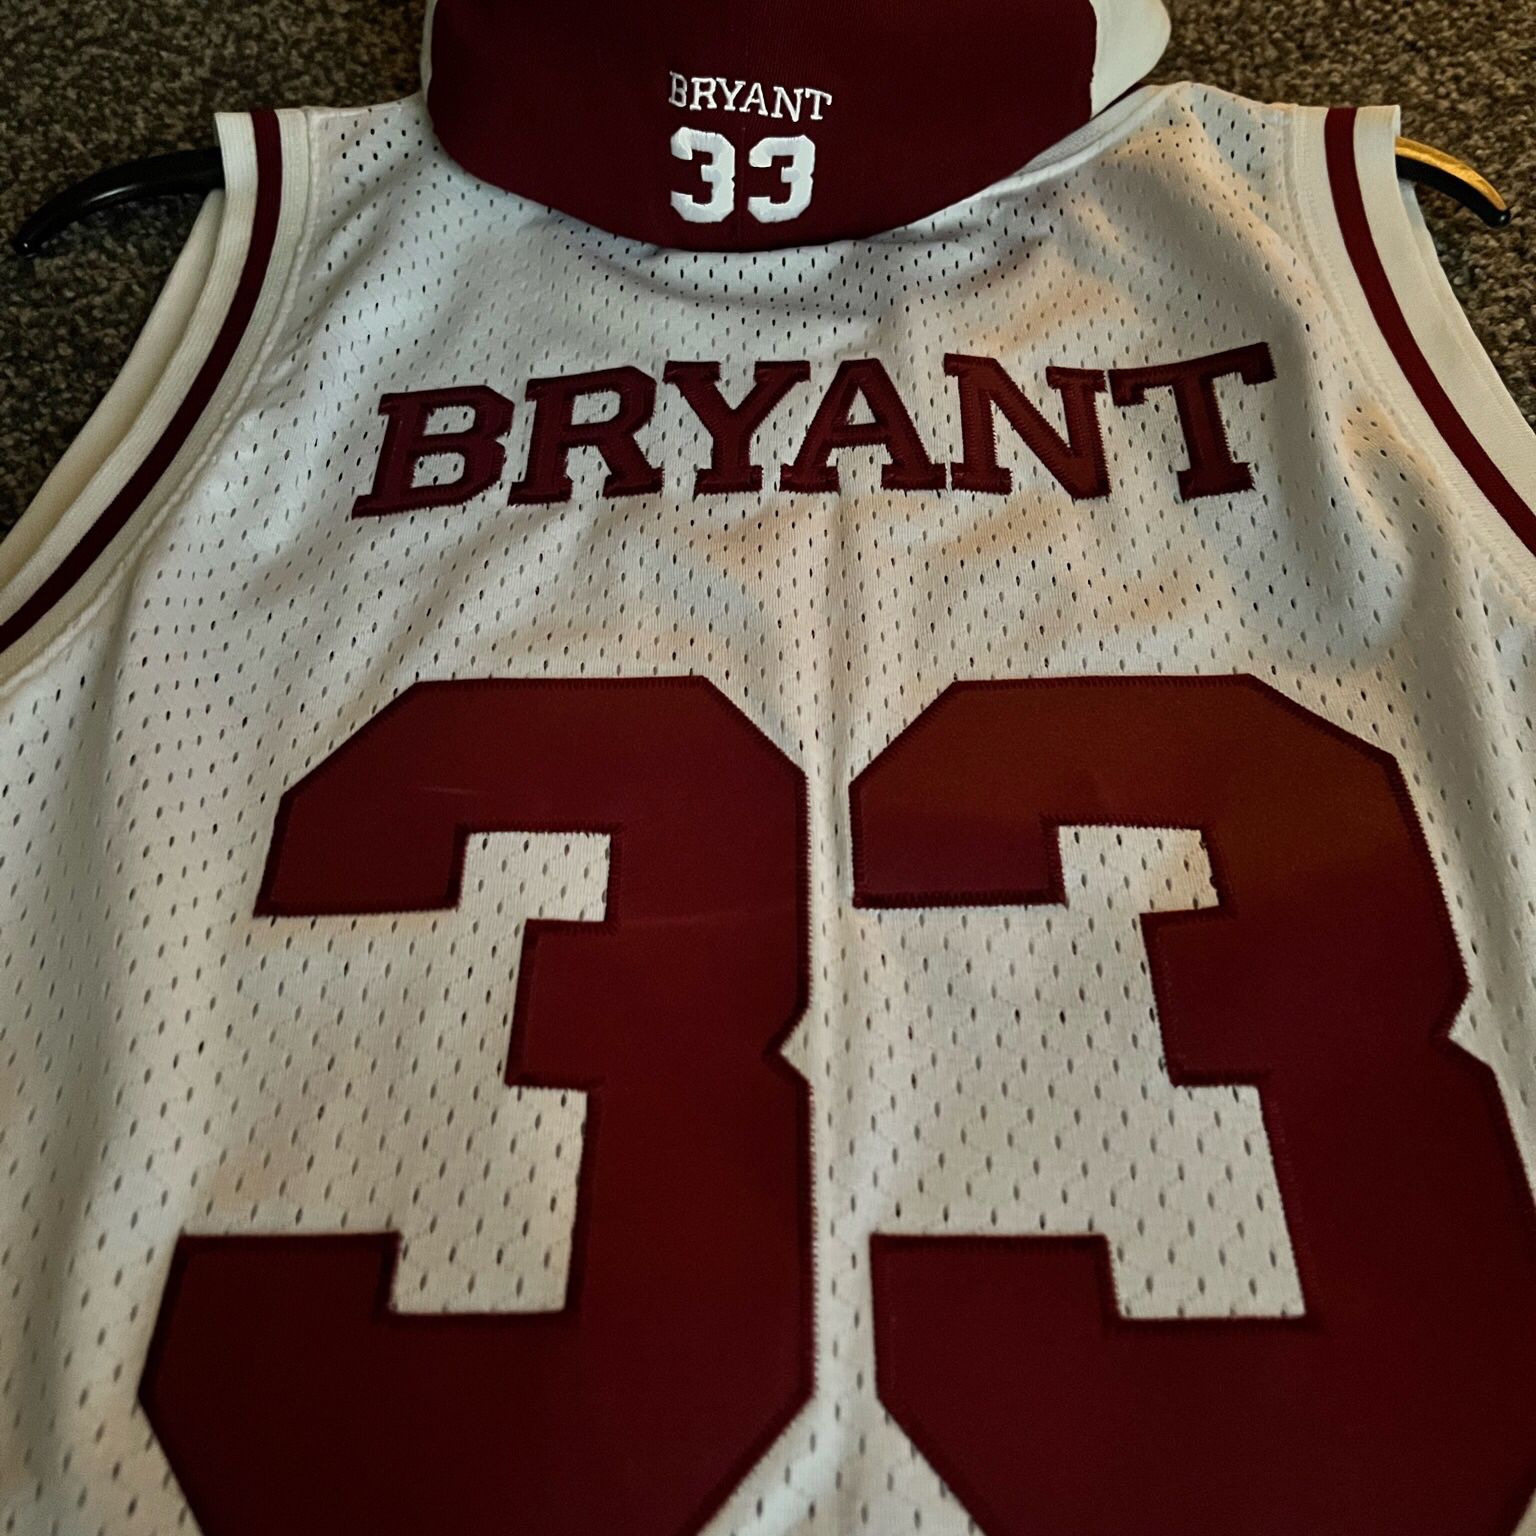 Hard Wood Classics Kobe Bryant Jersey for Sale in Lithonia, GA - OfferUp